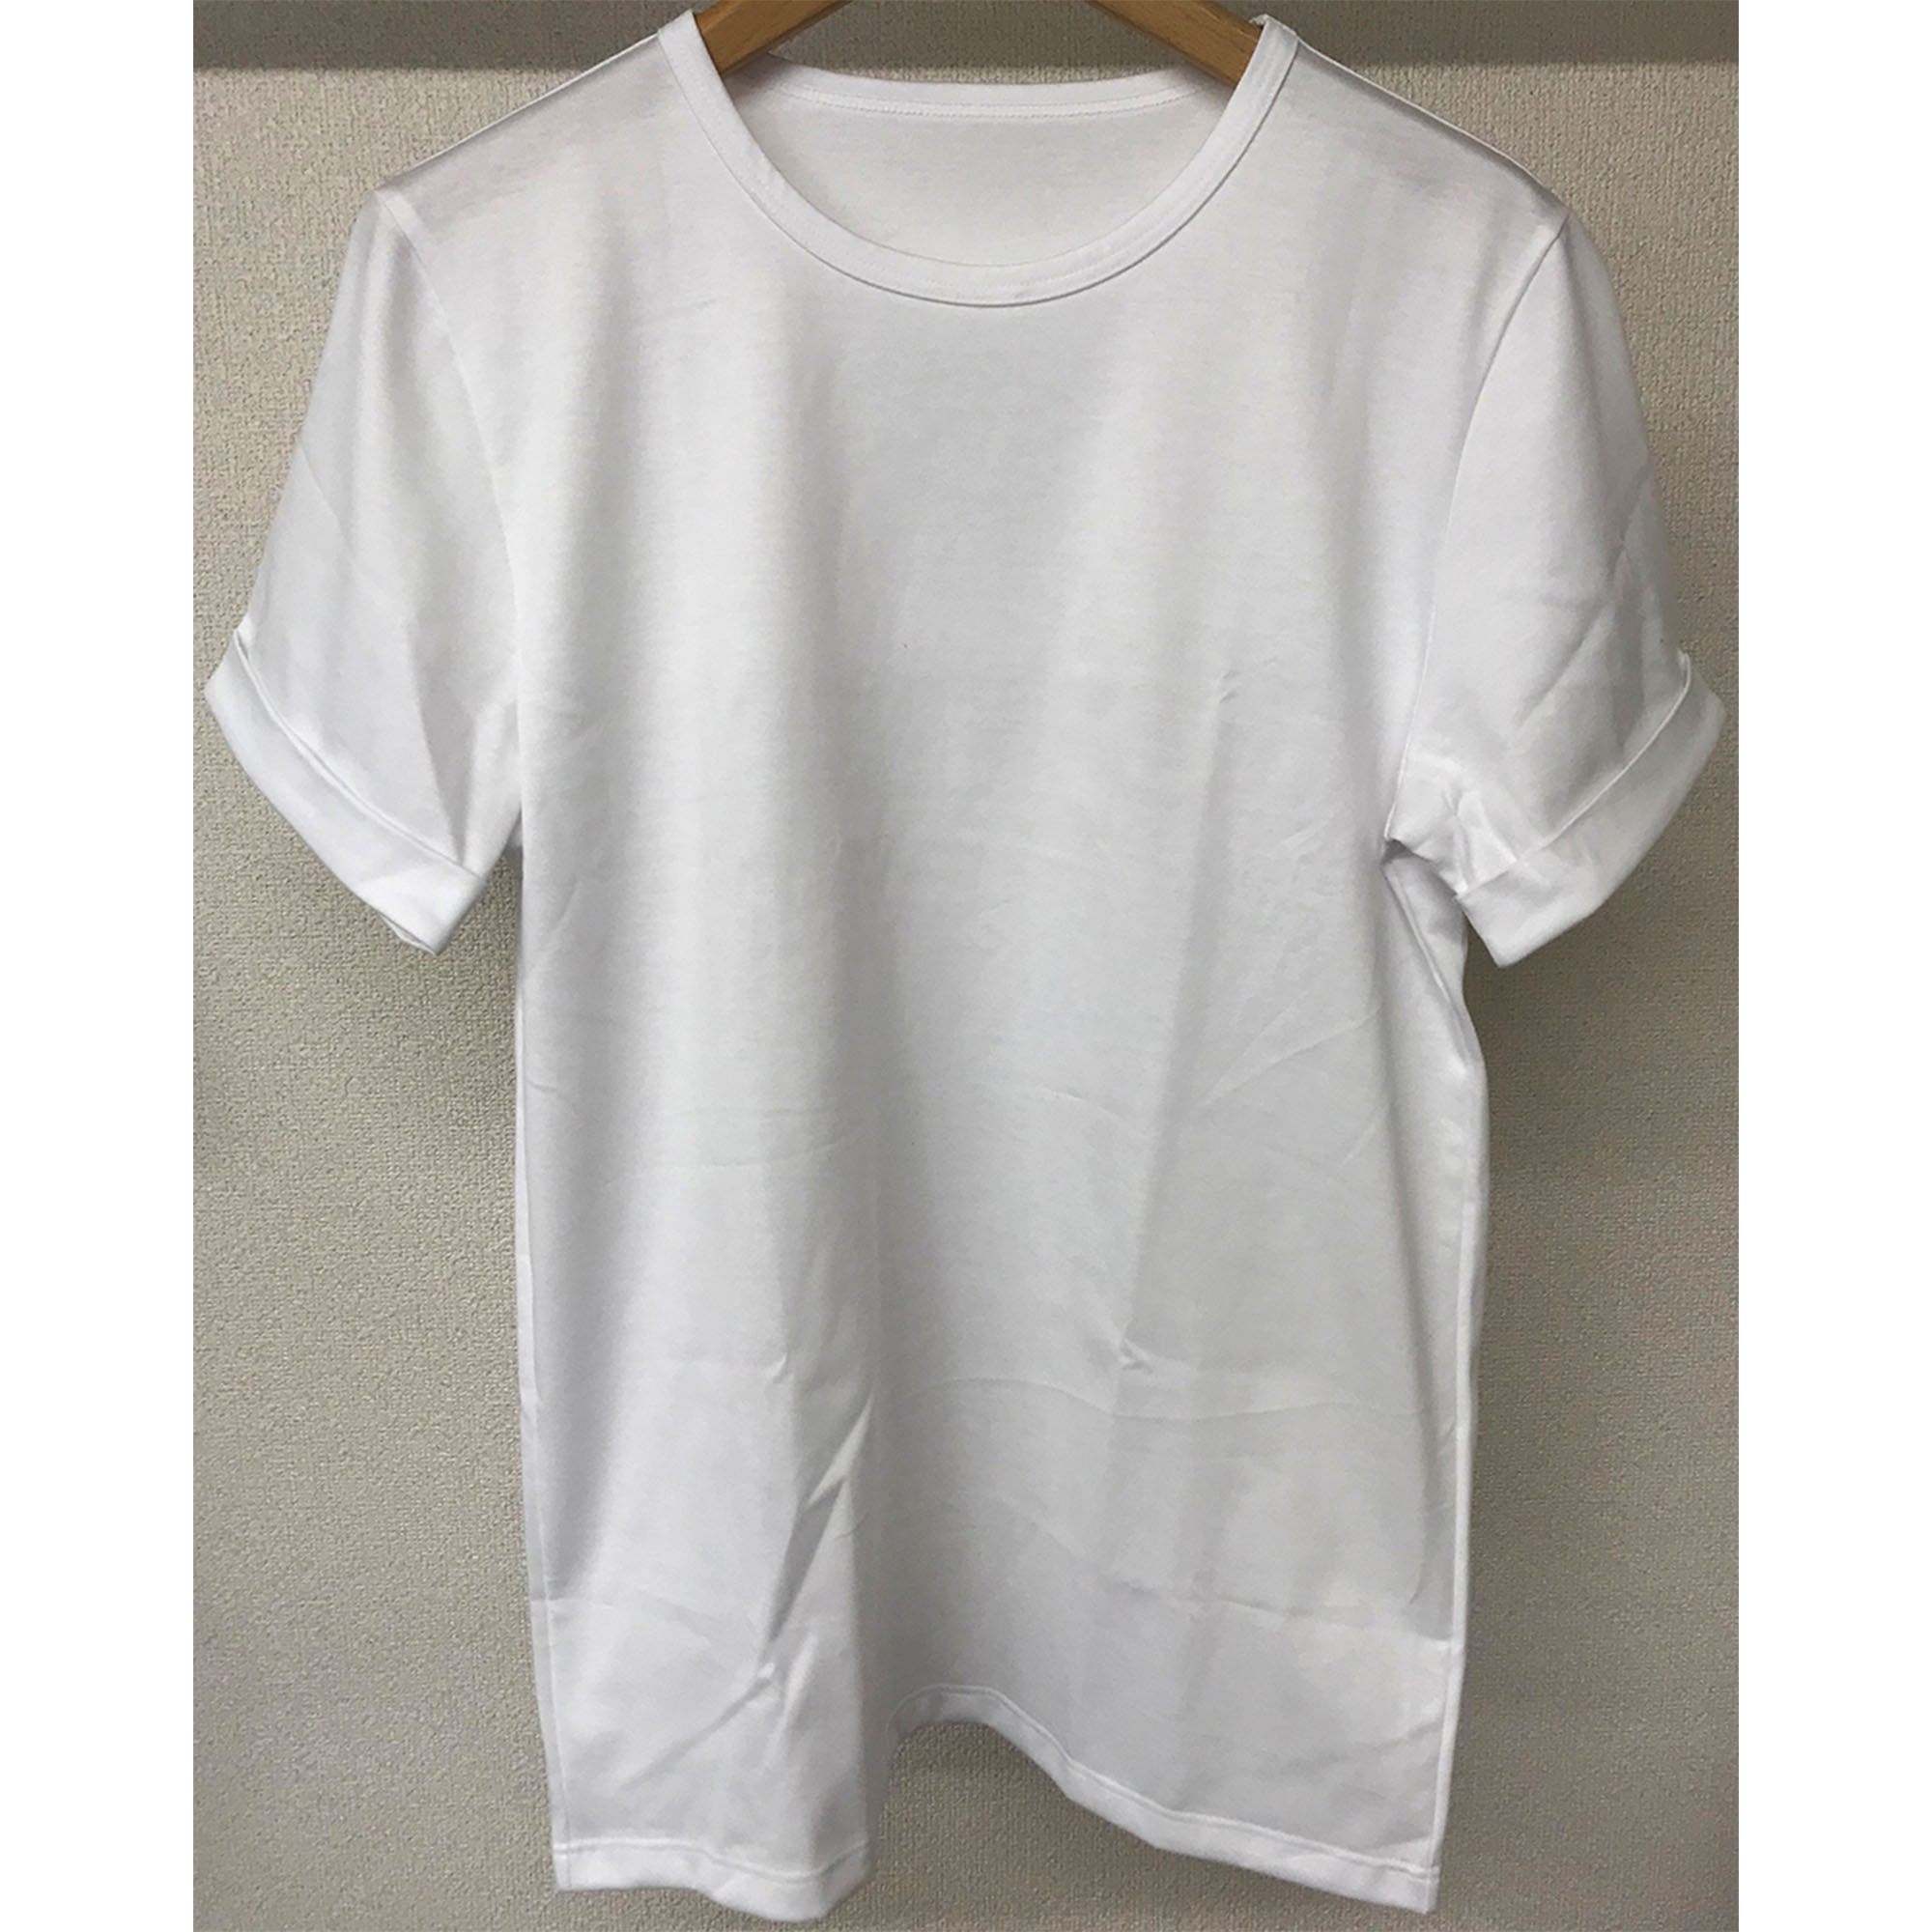 ROLL UP jersey TEE WHITE